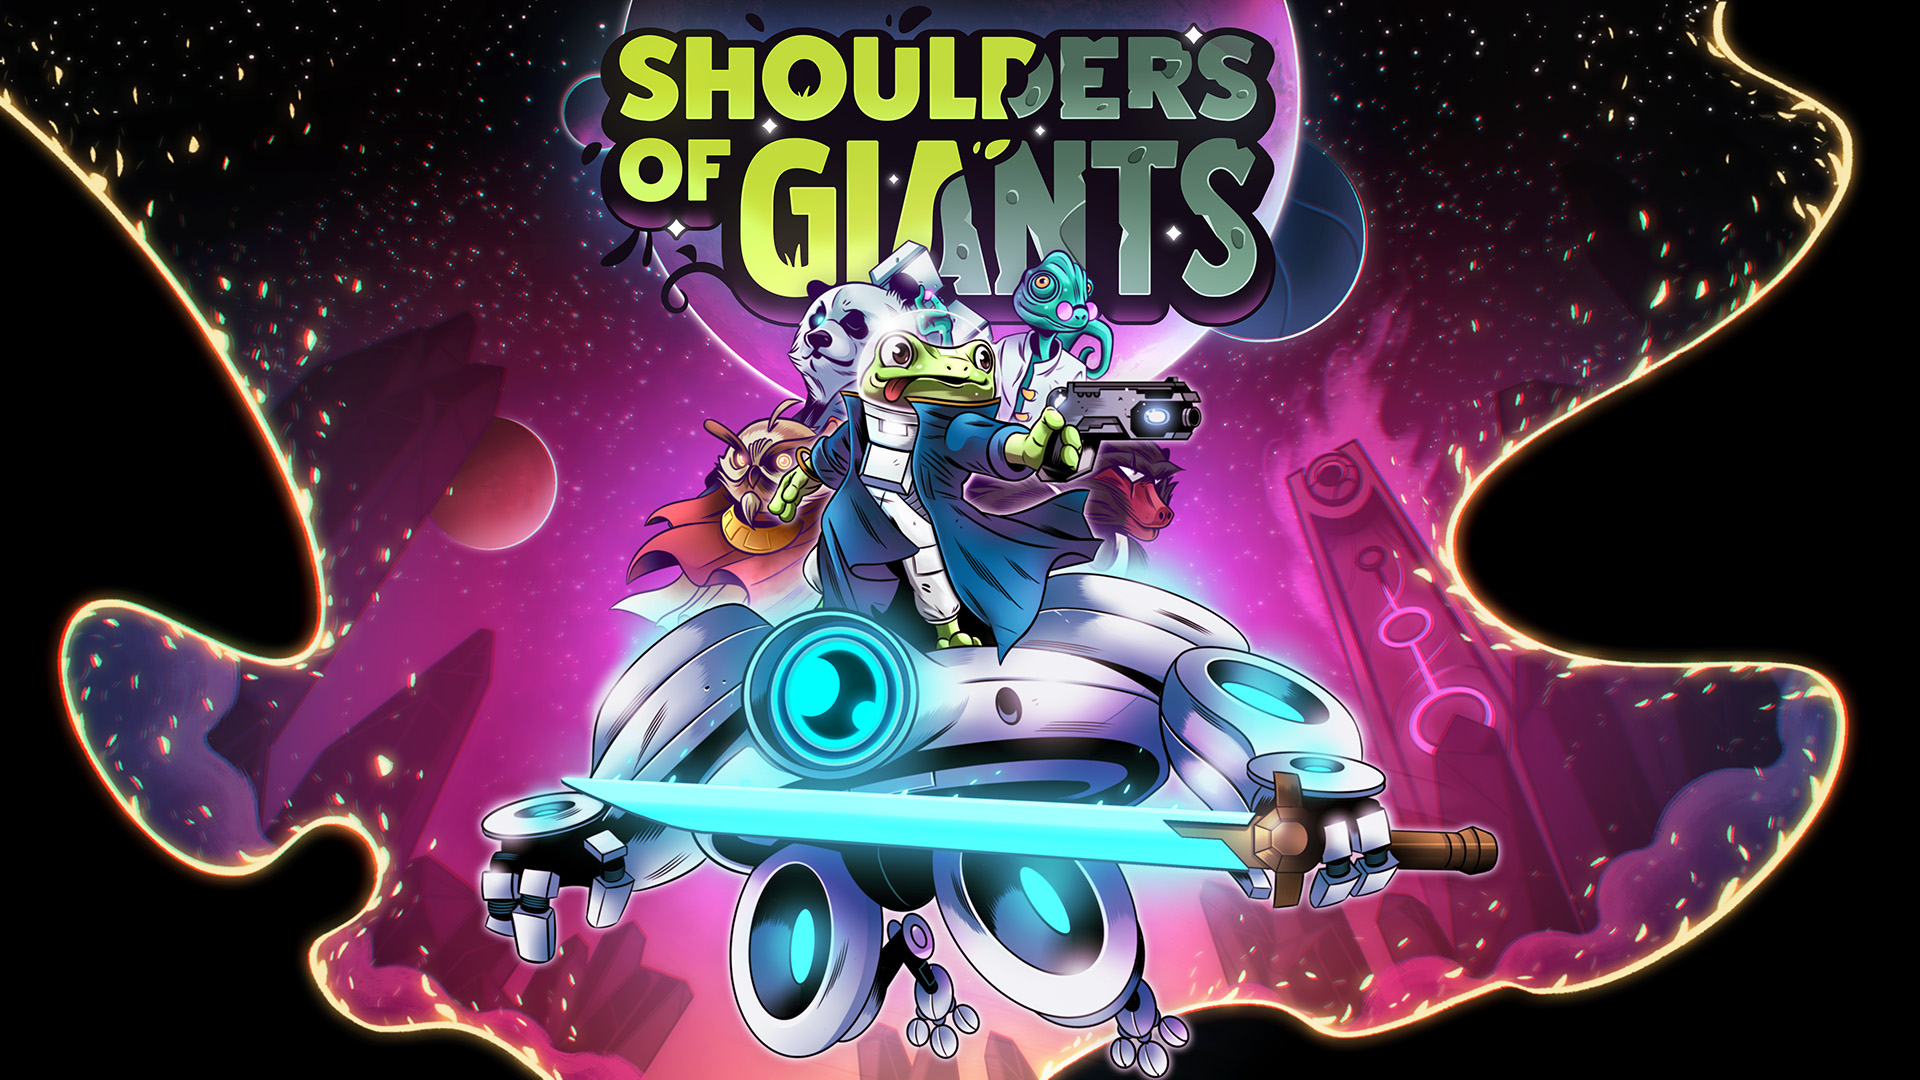 Preorder Sci-fi Roguelike Shoulders of Giants Today - Releasing January 26th